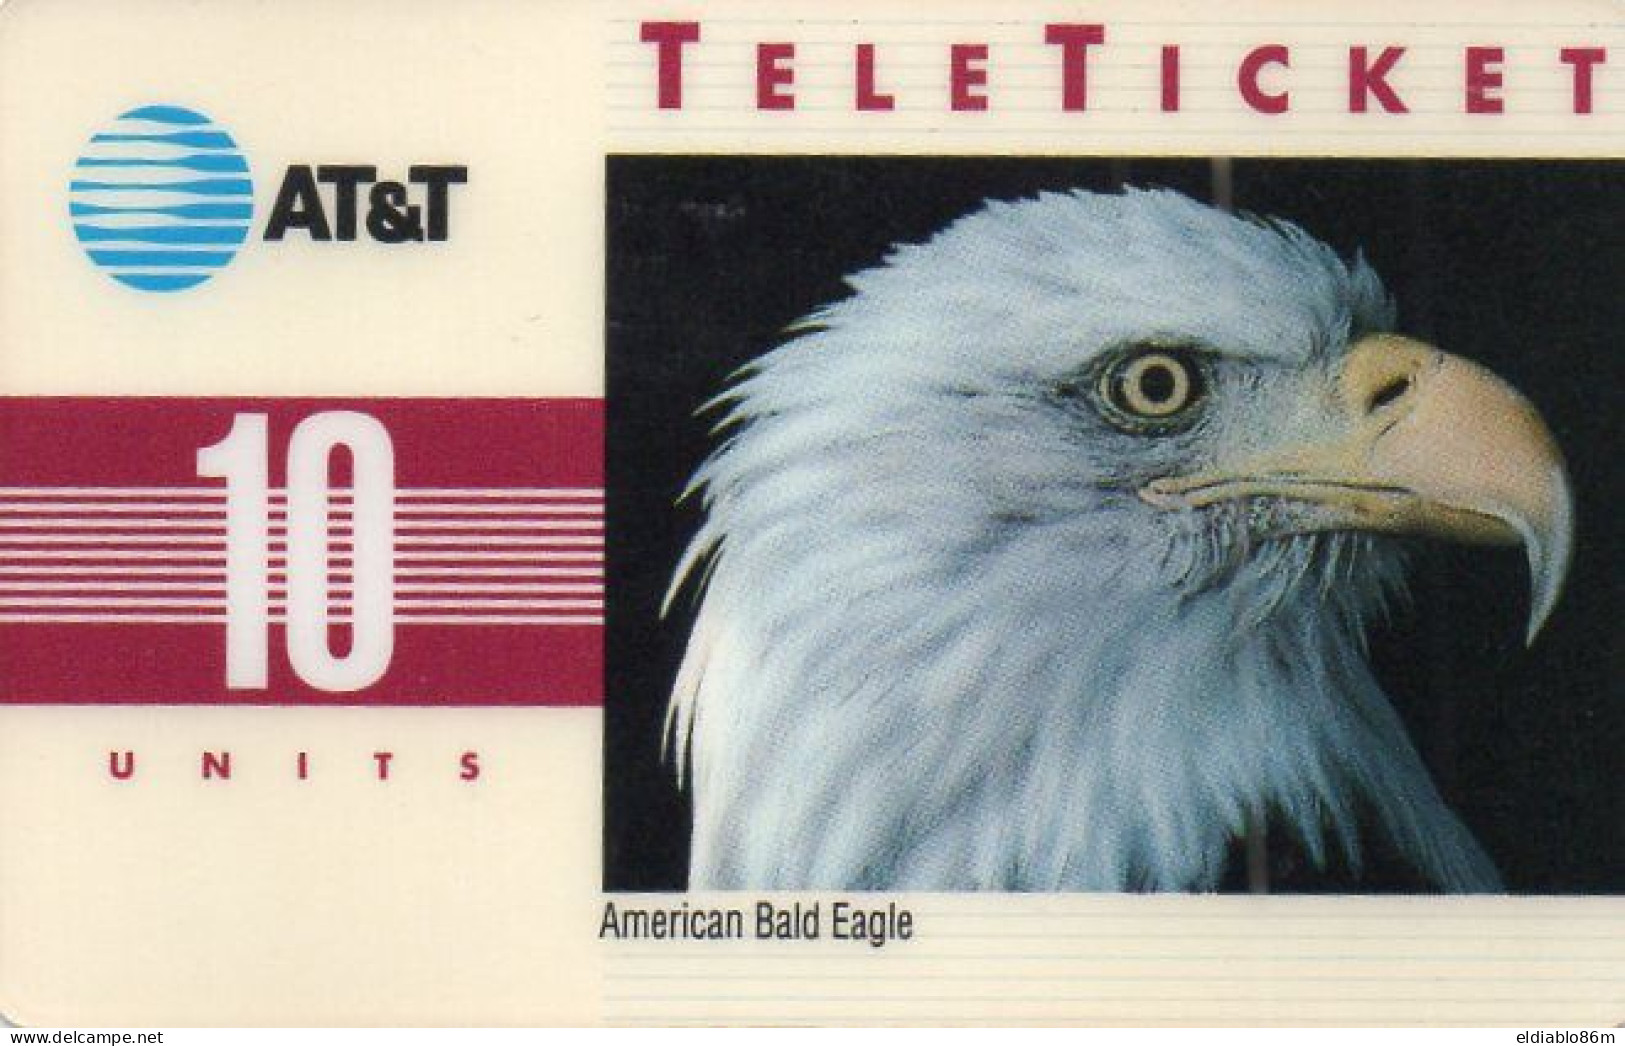 UNITED STATES - PREPAID - AT&T - TELETICKET - AMERICAN BALD EAGLE - GROUP 3 - GERMAN - AT&T